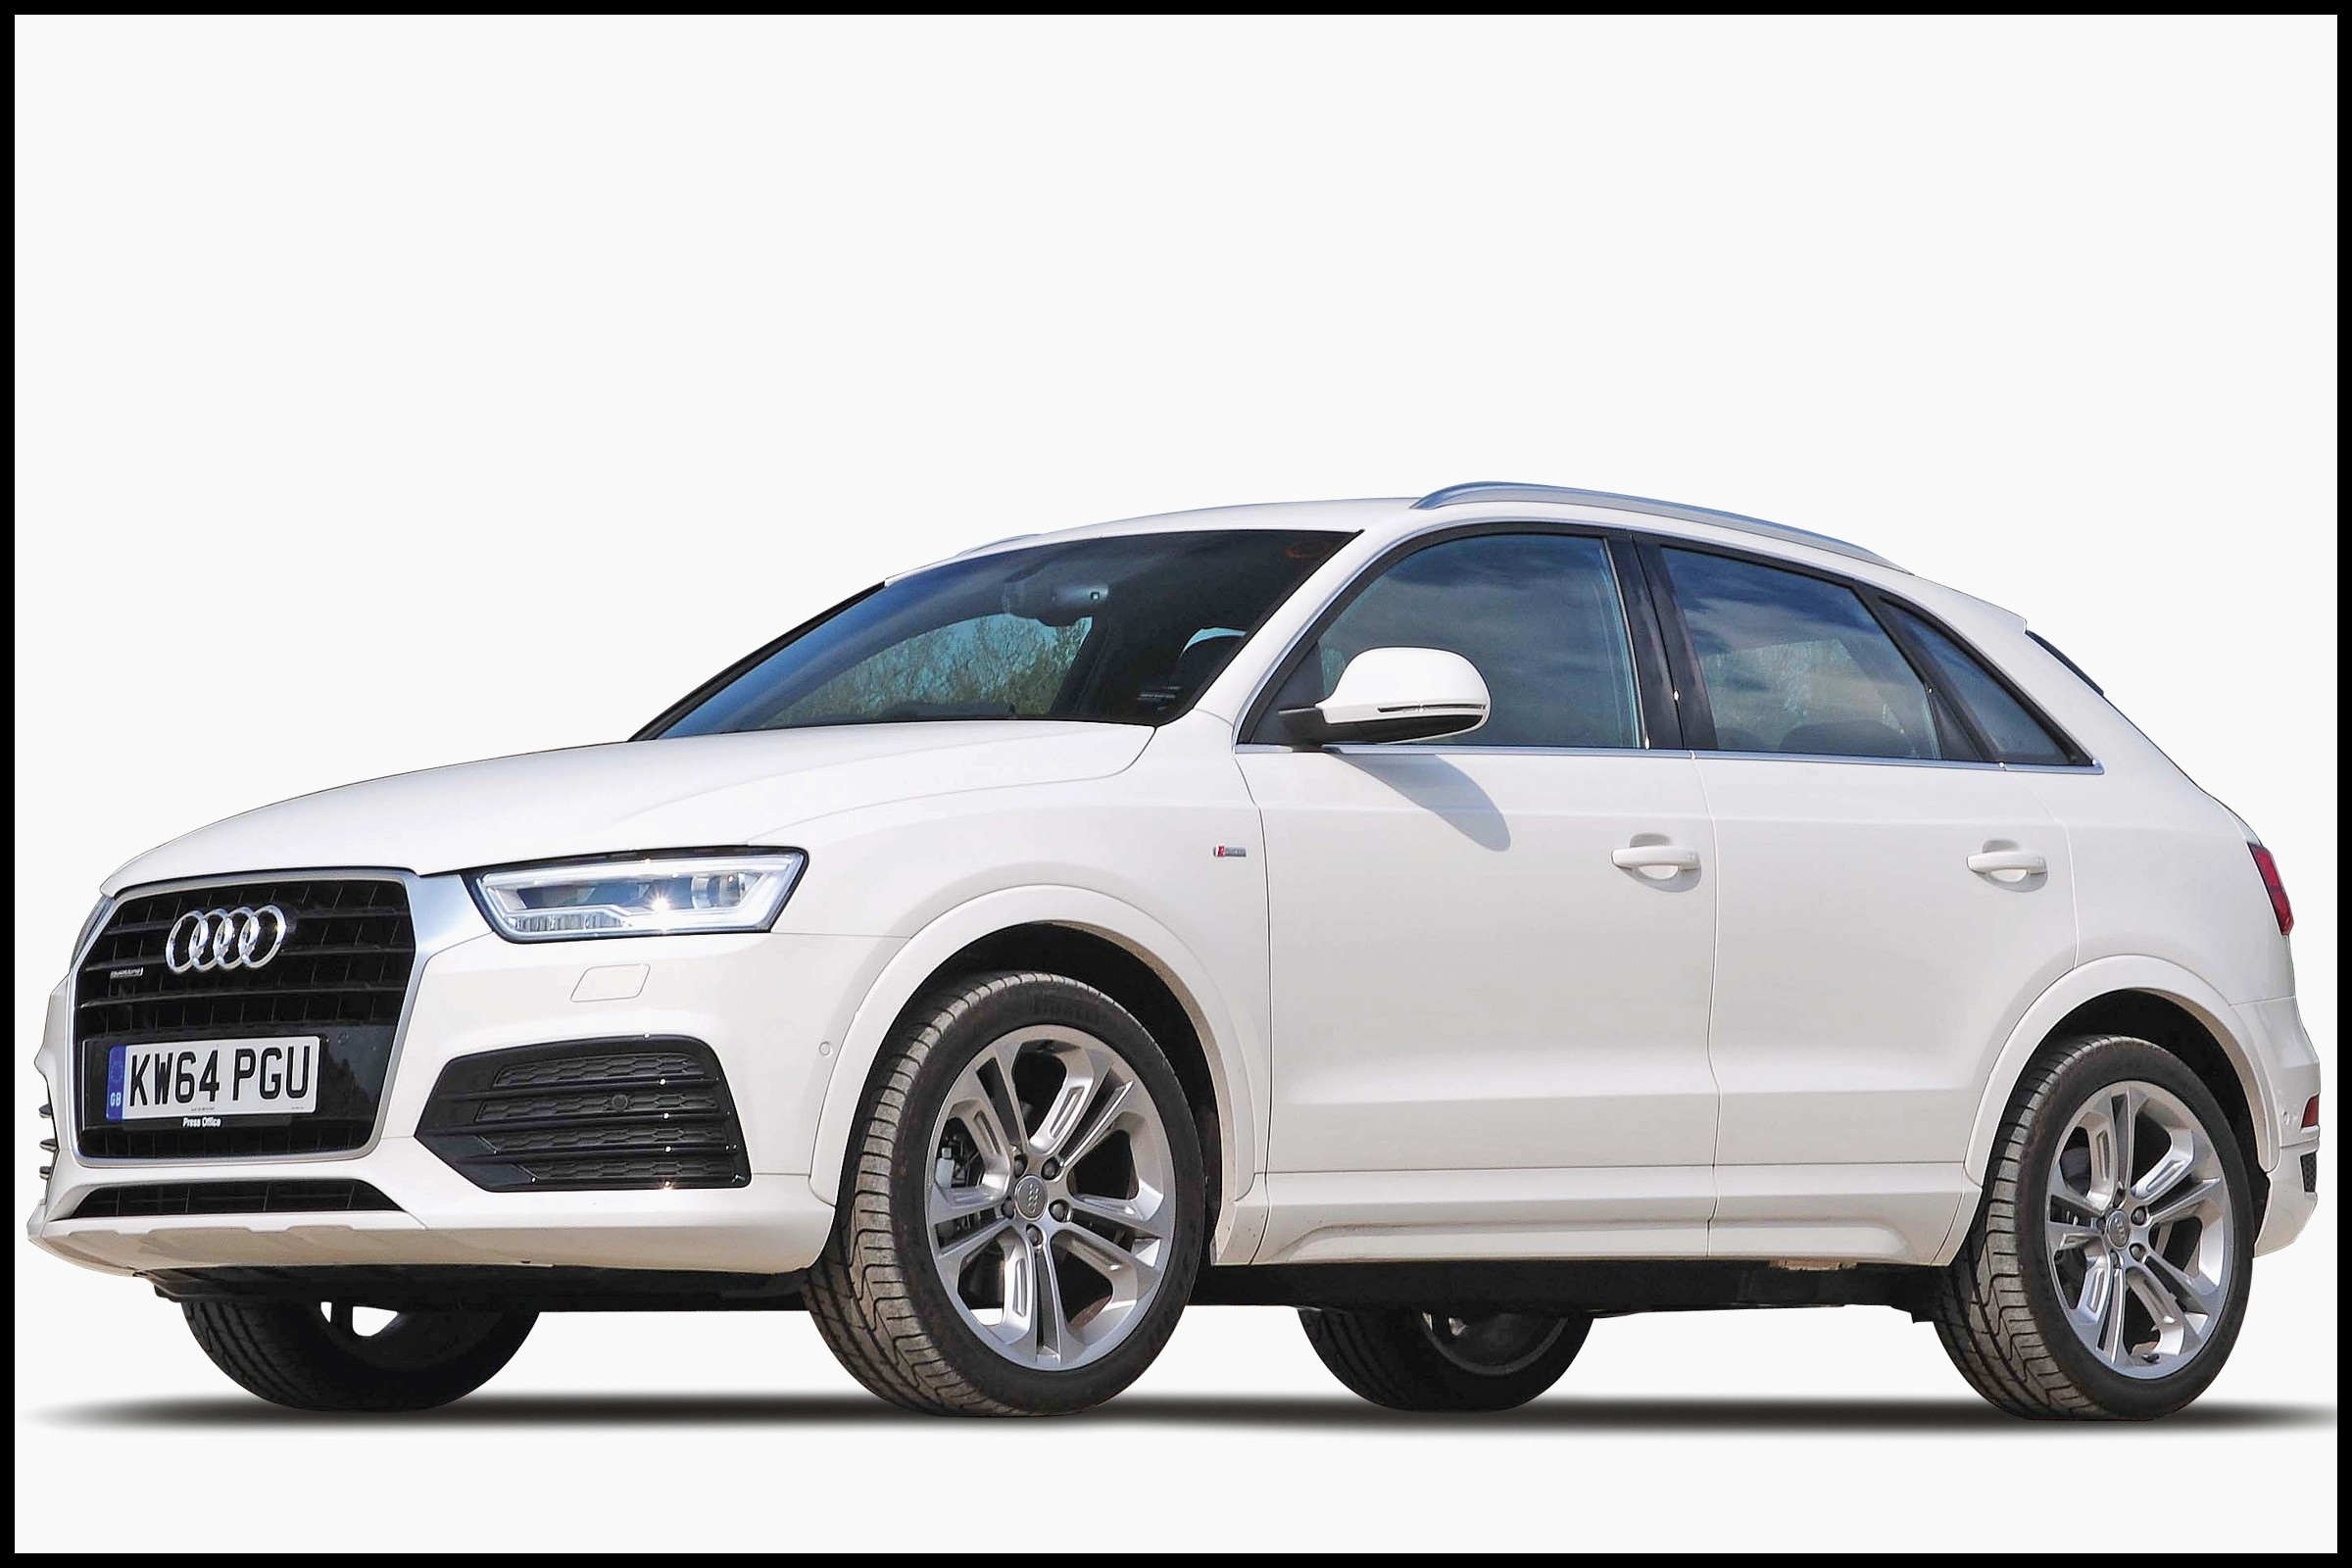 Audi S3 Interior Best Audi A3 Interior Right Hand Drive Lovely Audi Q3 Suv Review · 